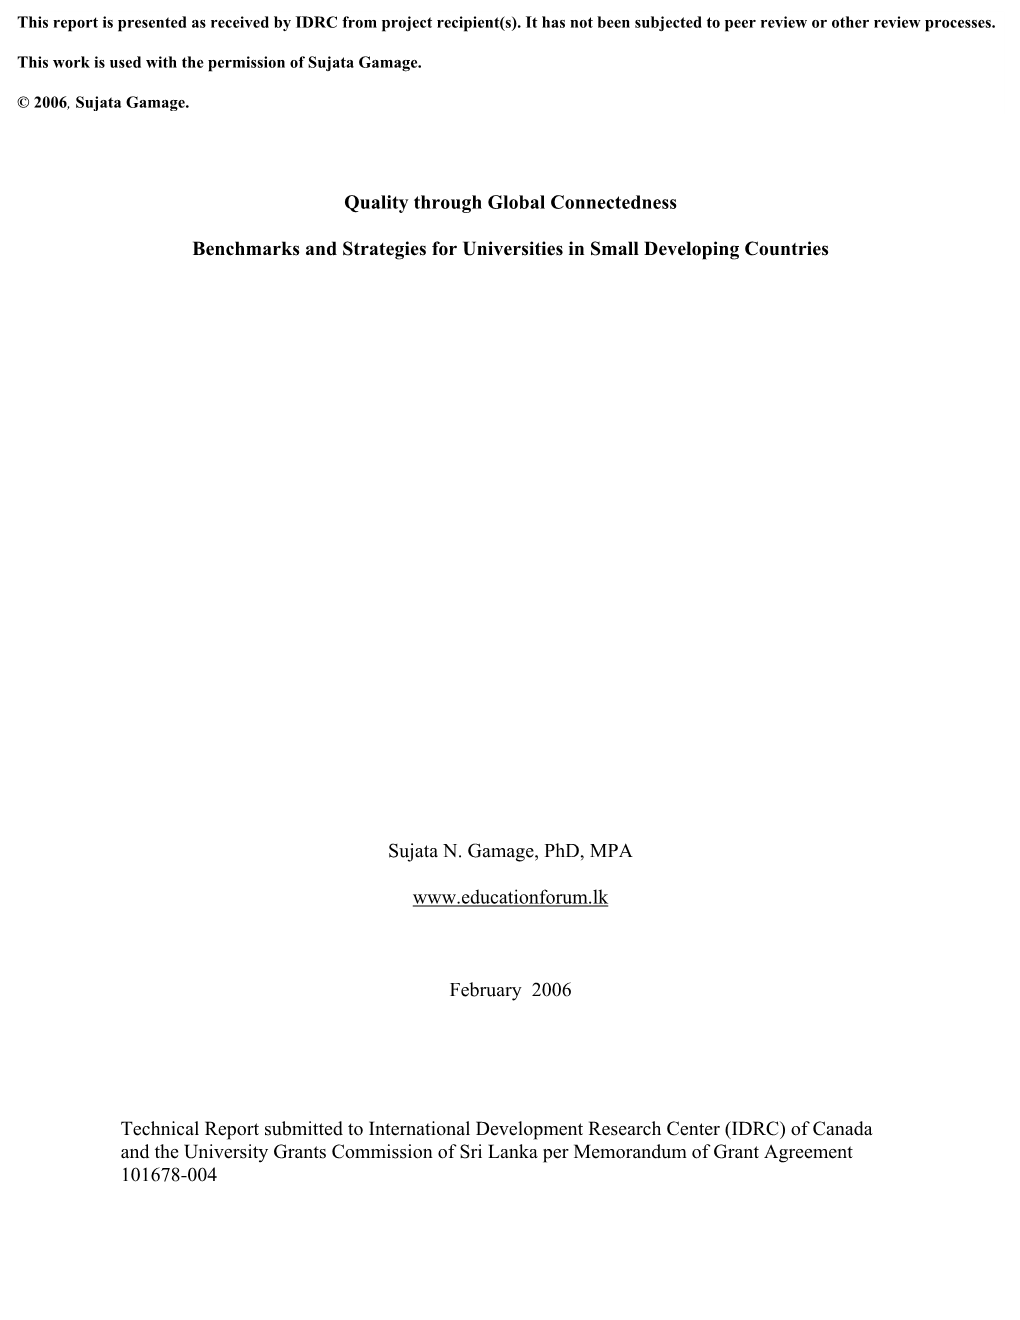 Quality Through Global Connectedness Benchmarks And